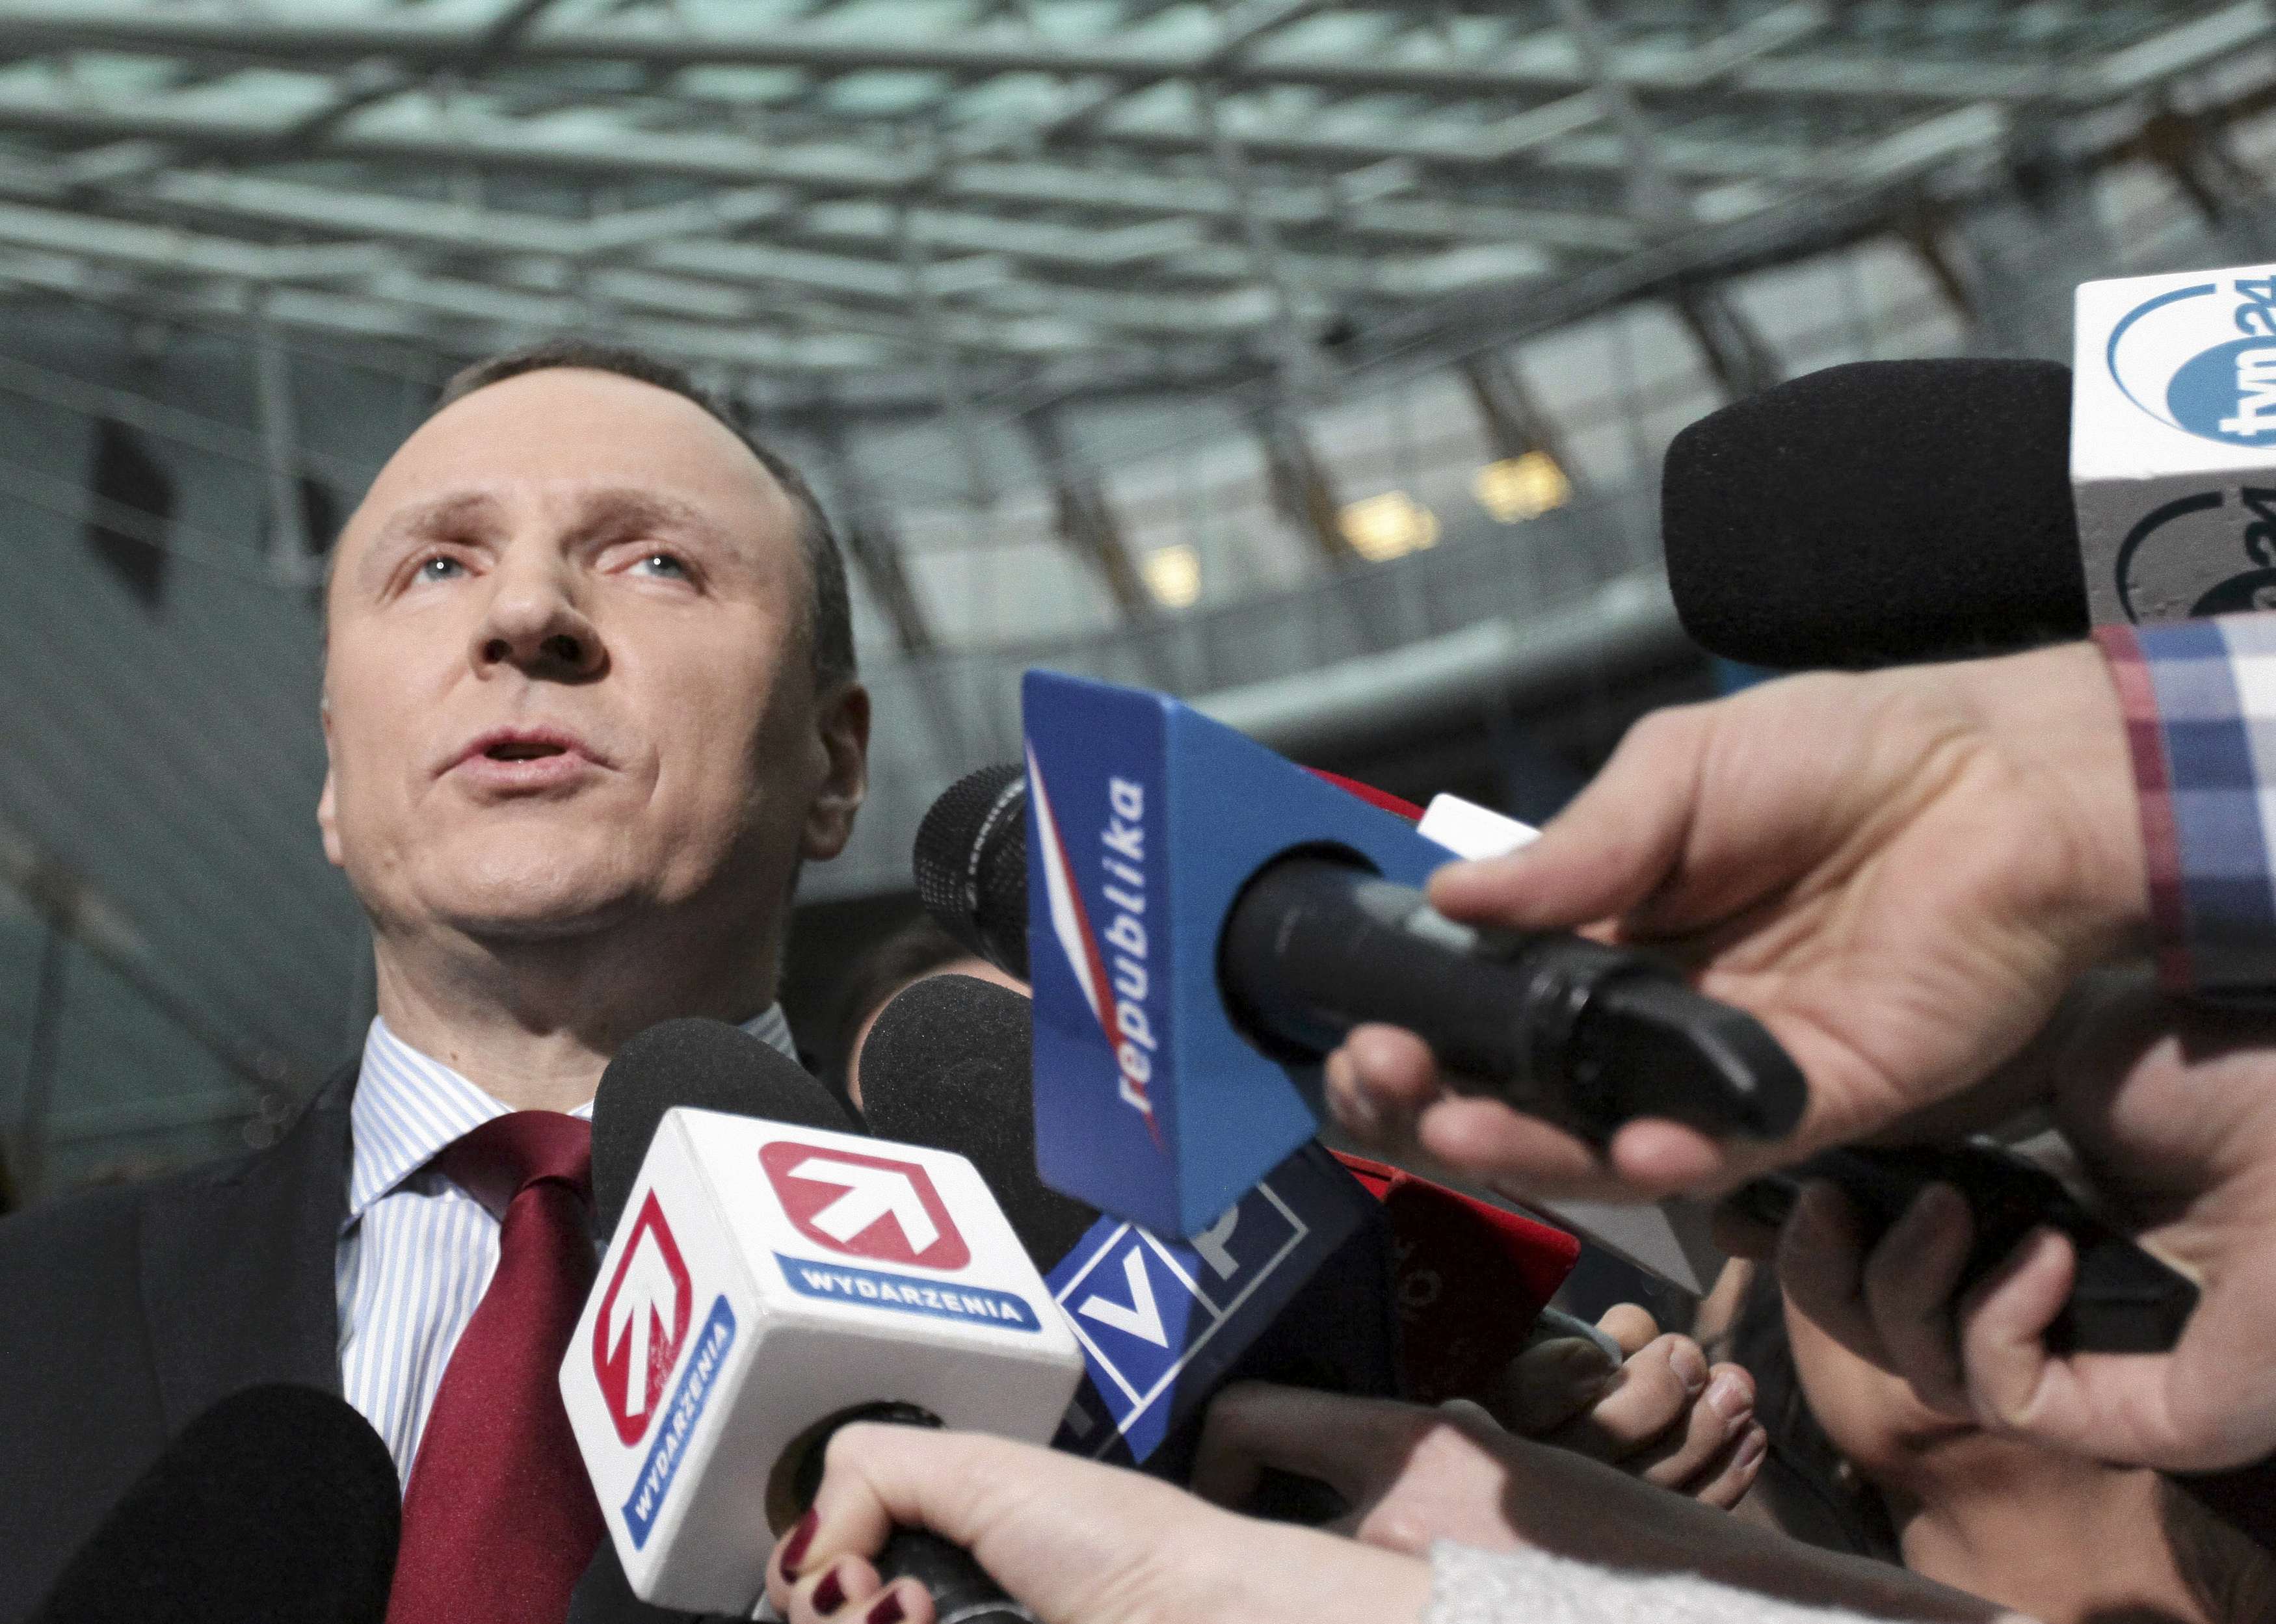 A newly appointed president of Polish Television (TVP) Jacek Kurski speaks to the press in Warsaw, Poland January 8, 2016. The European Commission will discuss next week the situation in Poland, the bloc's biggest eastern member, where a new conservative and Eurosceptic government drew criticism that it was undermining democratic principles with its reforms of the country's state-funded media and the top constitutional court. REUTERS/Slawomir Kaminski/Agencja Gazeta THIS IMAGE HAS BEEN SUPPLIED BY A THIRD PARTY. IT IS DISTRIBUTED, EXACTLY AS RECEIVED BY REUTERS, AS A SERVICE TO CLIENTS. POLAND OUT. NO COMMERCIAL OR EDITORIAL SALES IN POLAND.